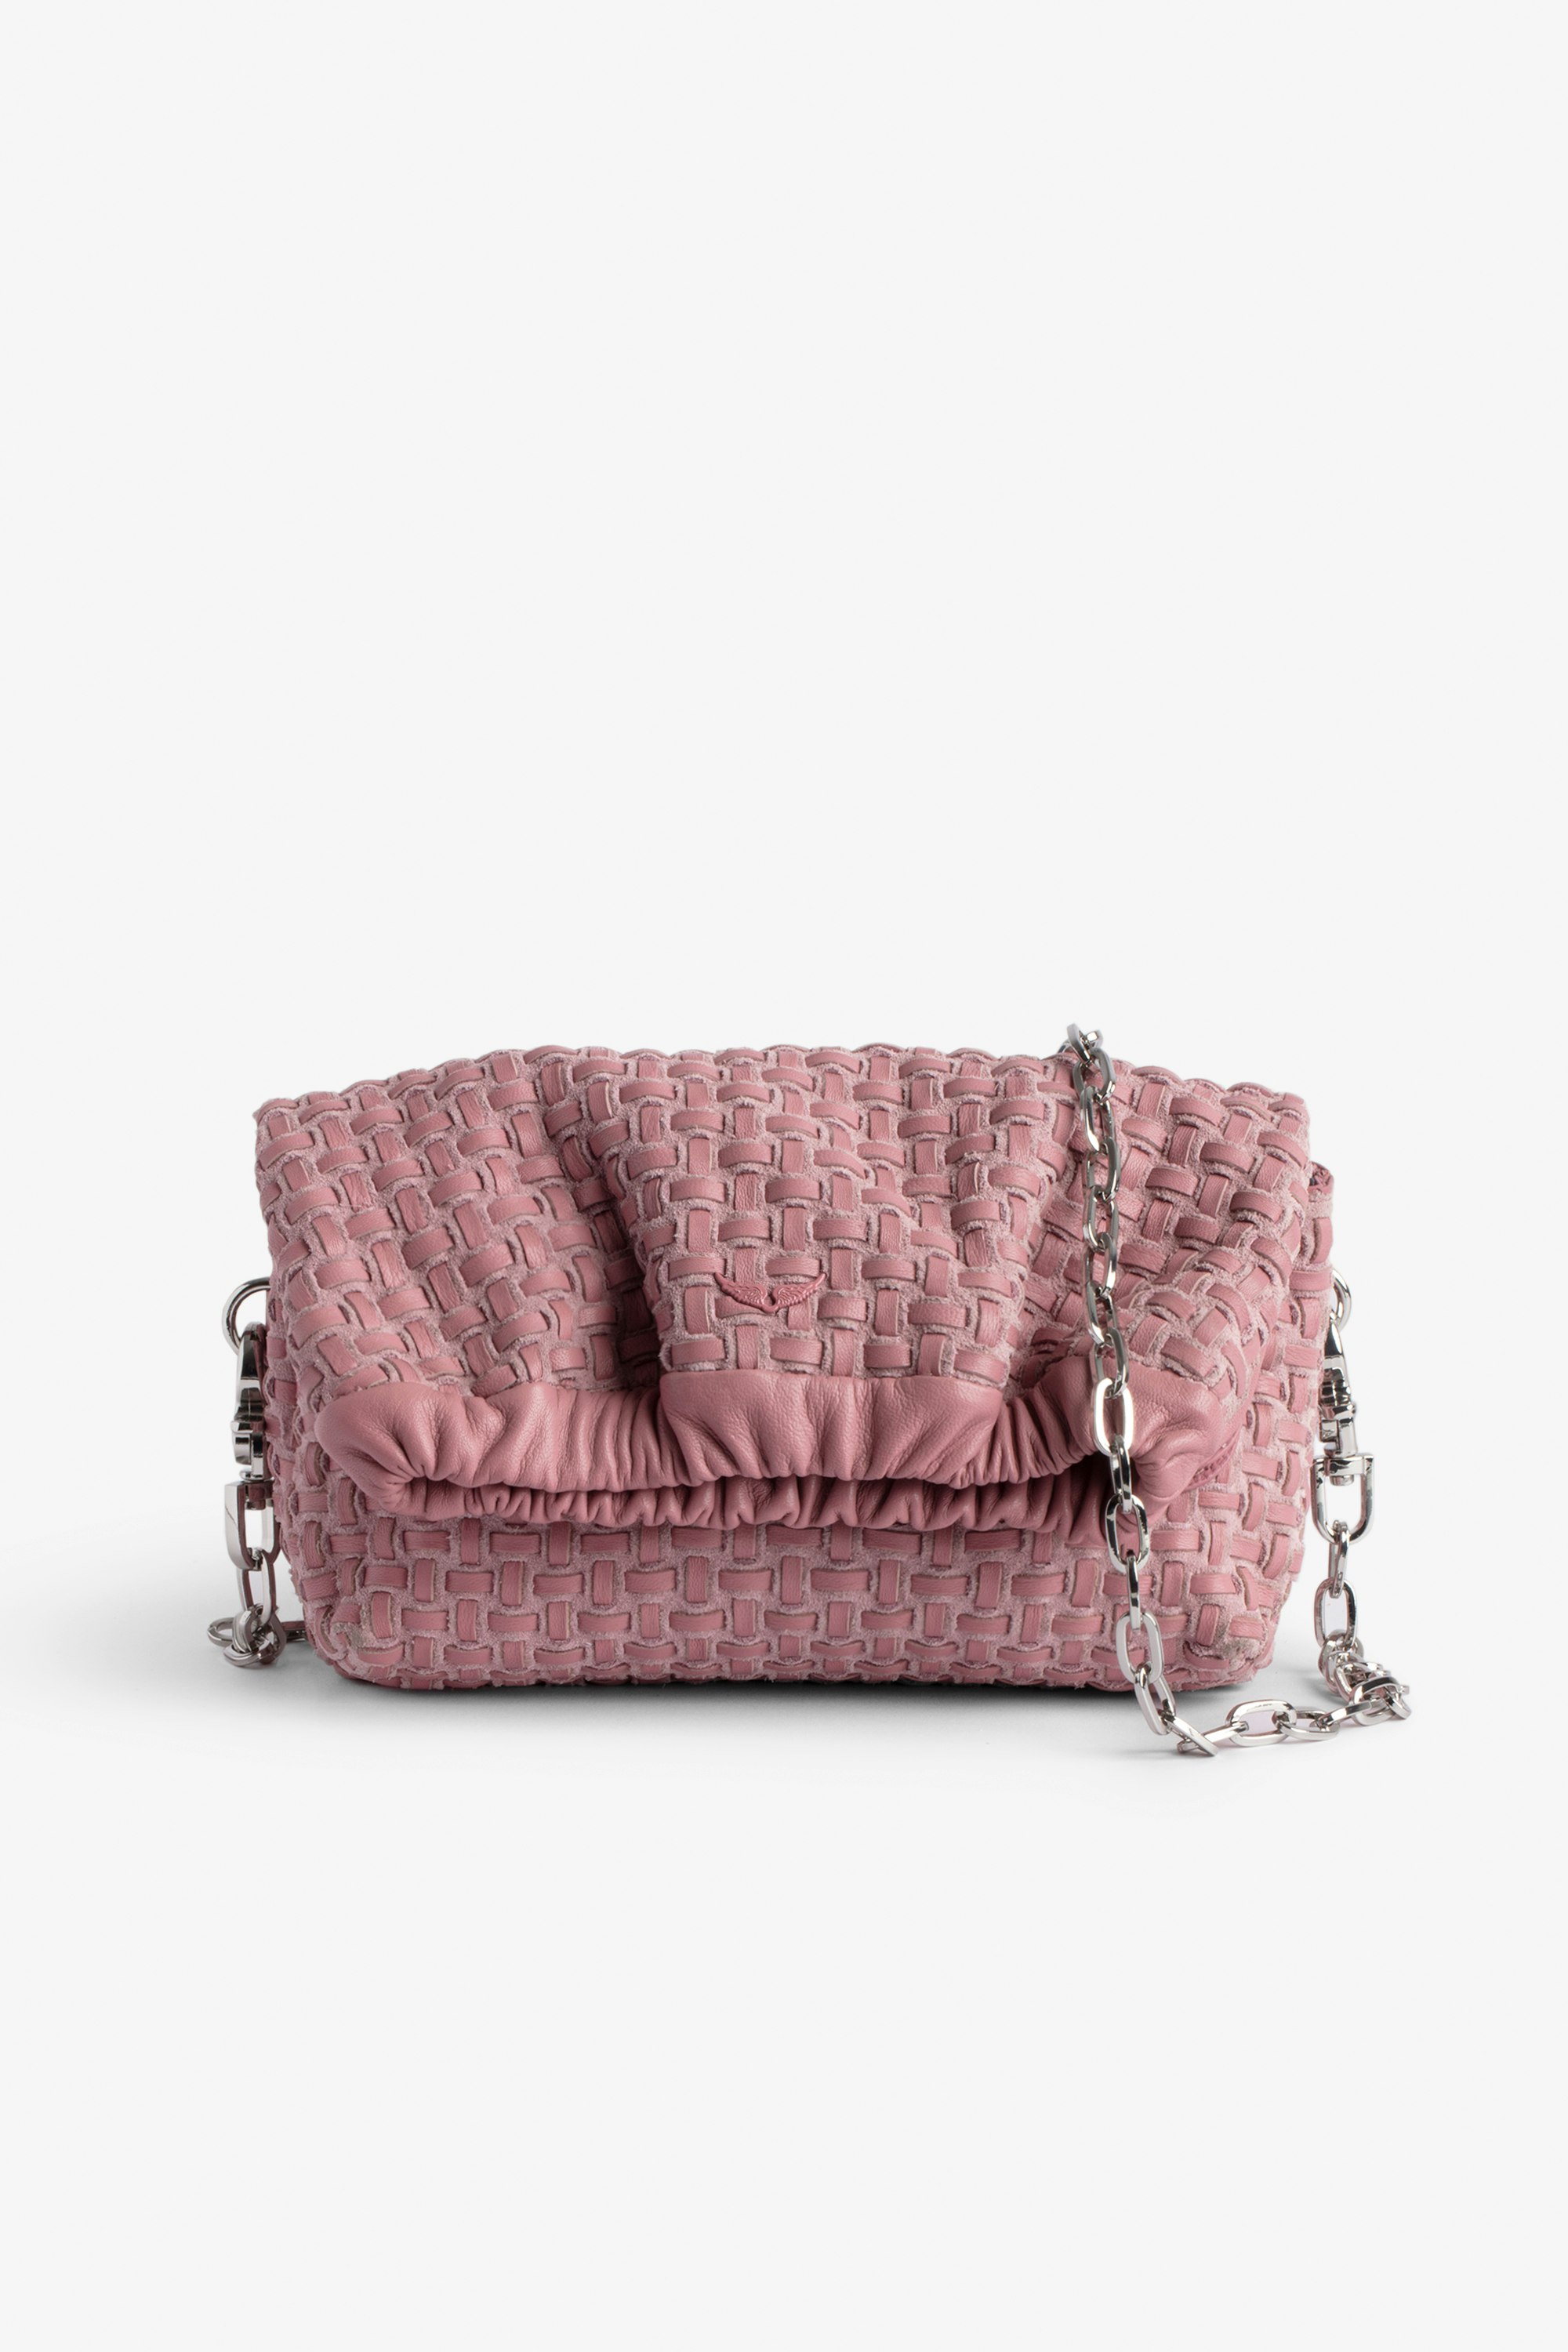 Rockyssime XS Bag Women’s small bag in pink latticework leather with gathered closure and metal chain